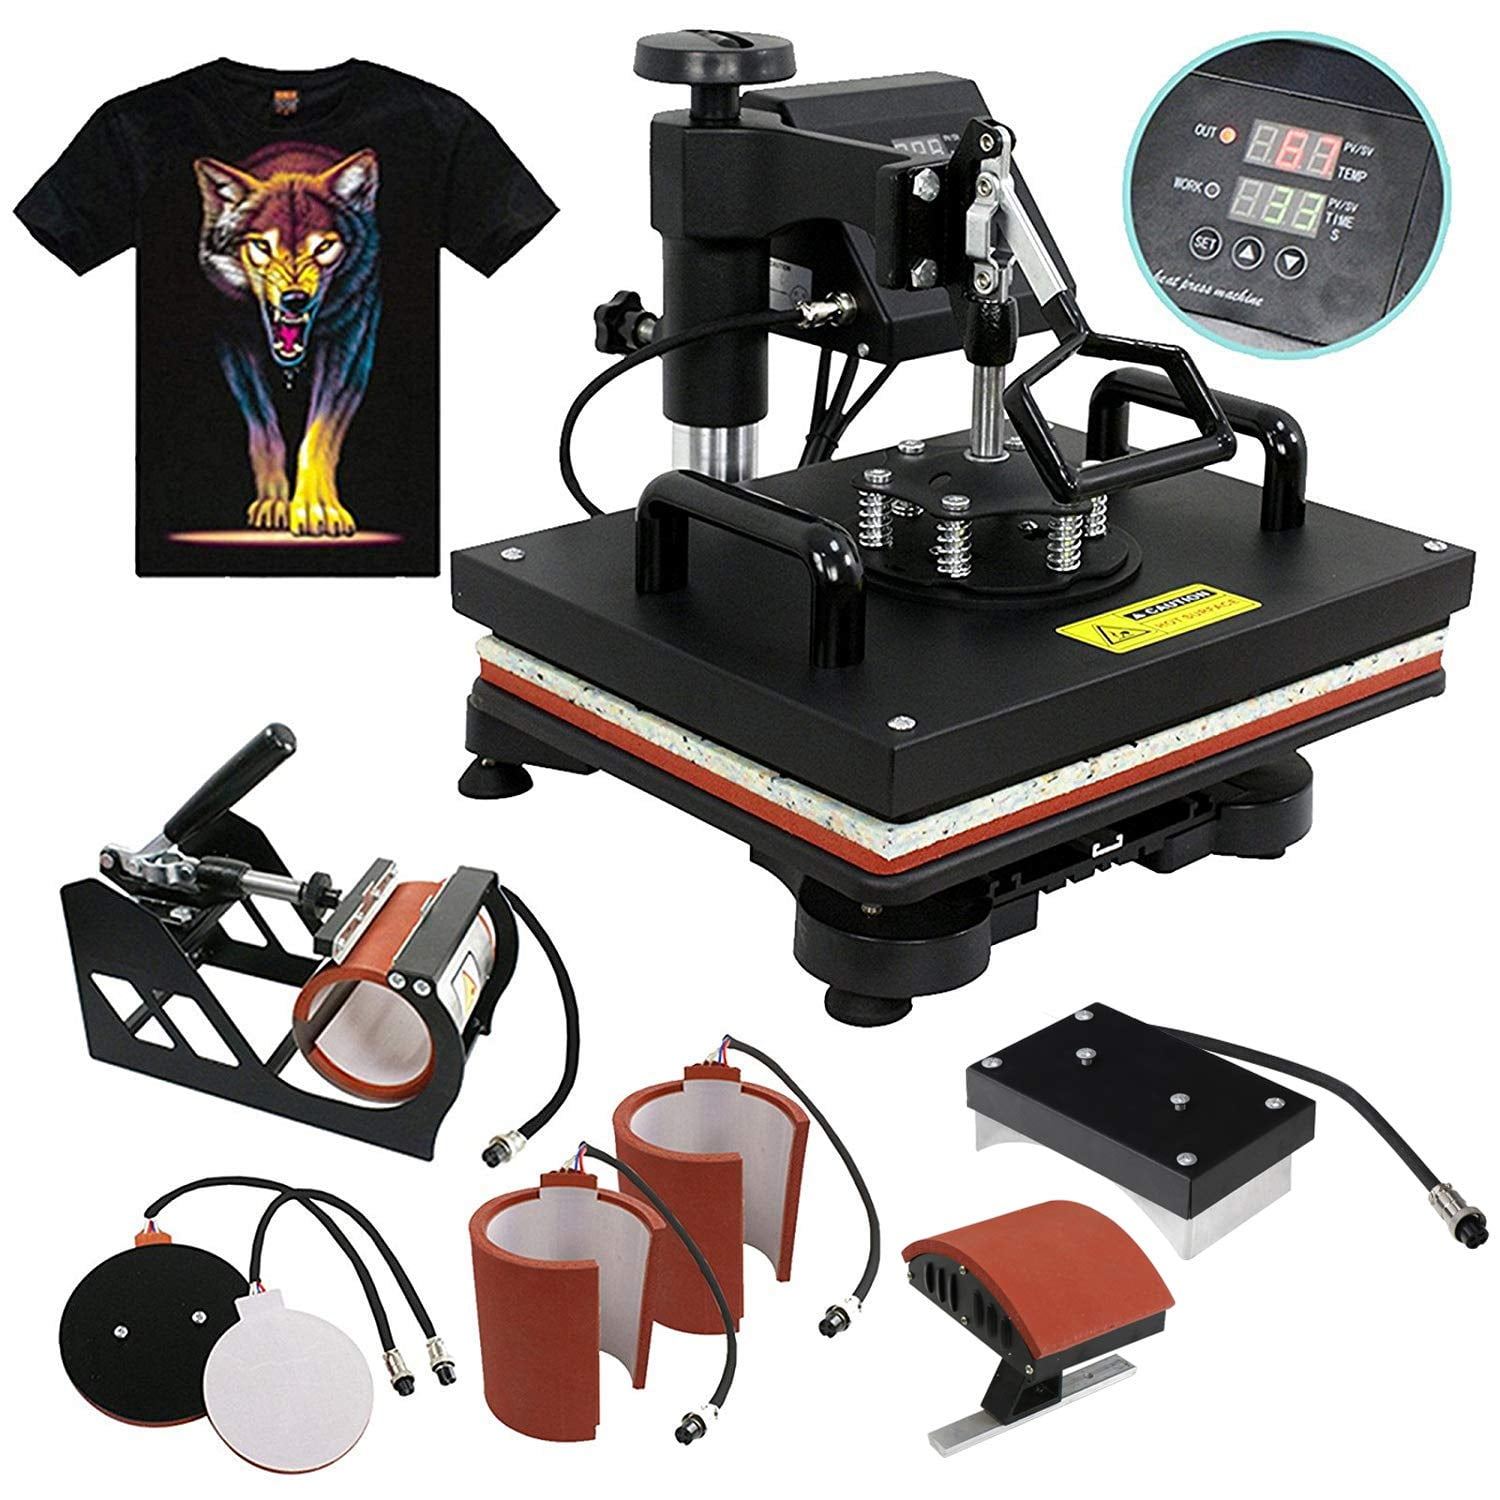 Details about   12"x9in" 360° Swing Away Heat Press Machine Sublimation Transfer Digital Control 